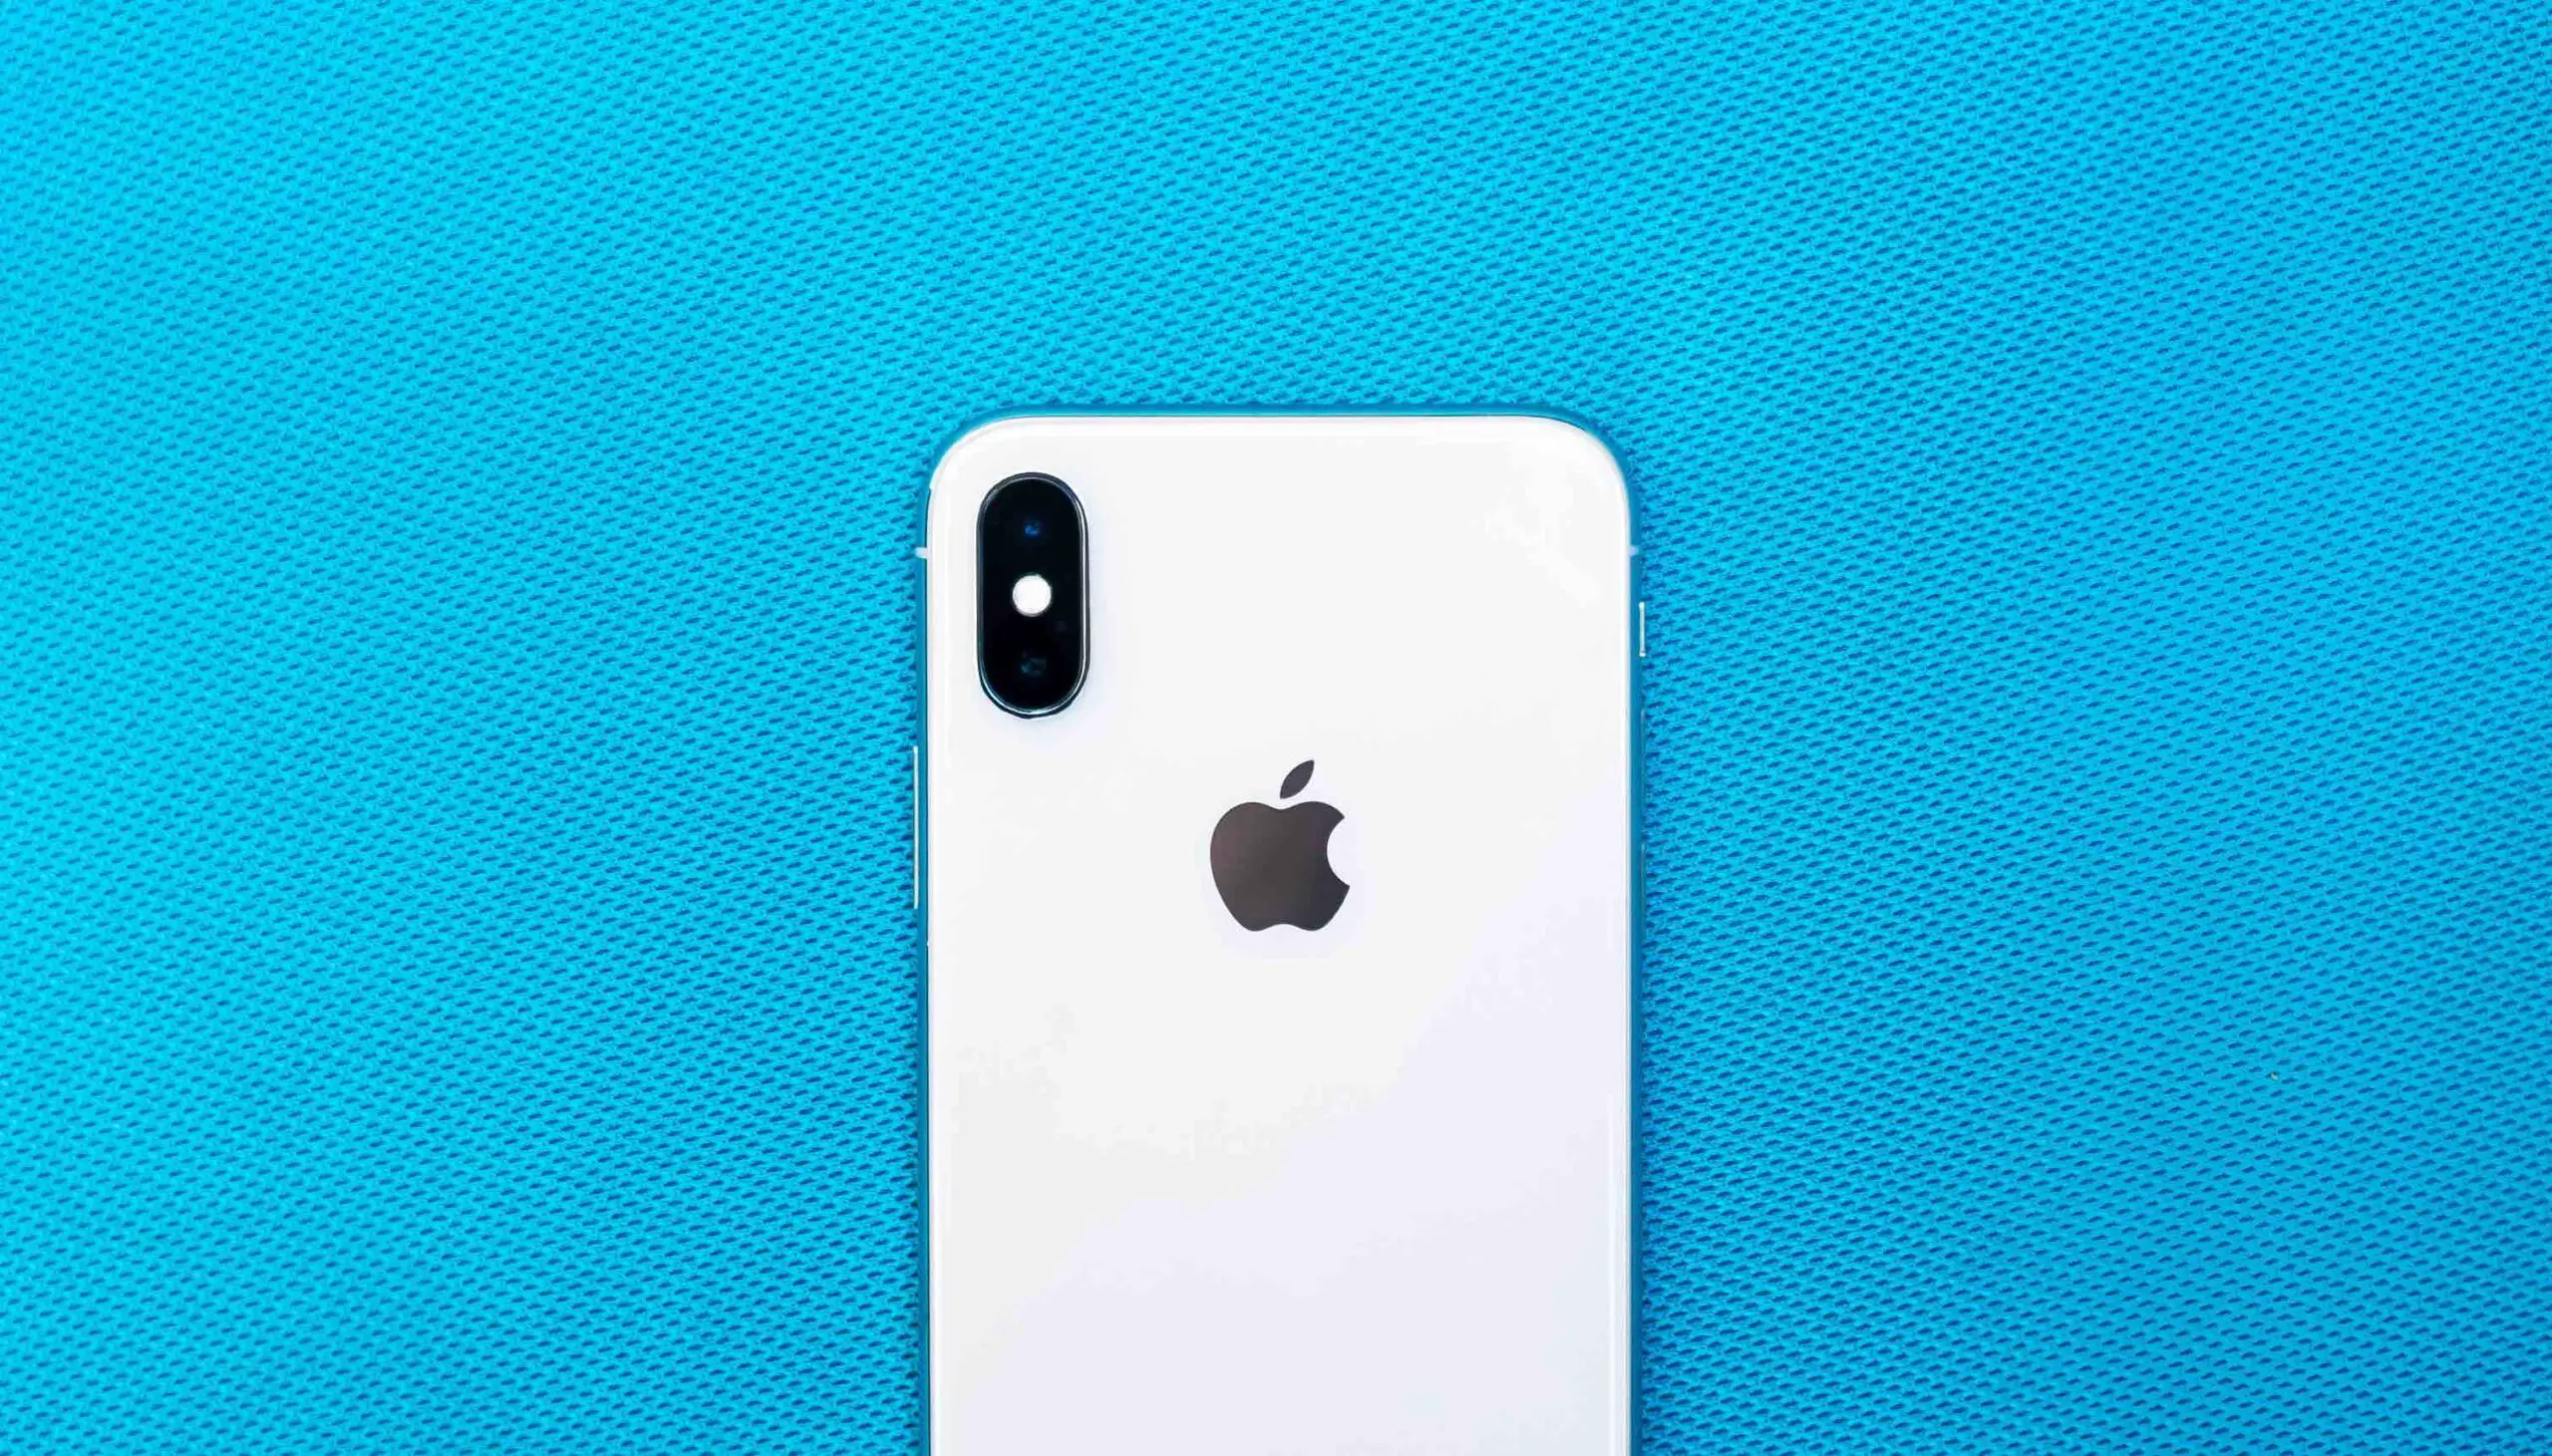 An iphone in a blue cloth background